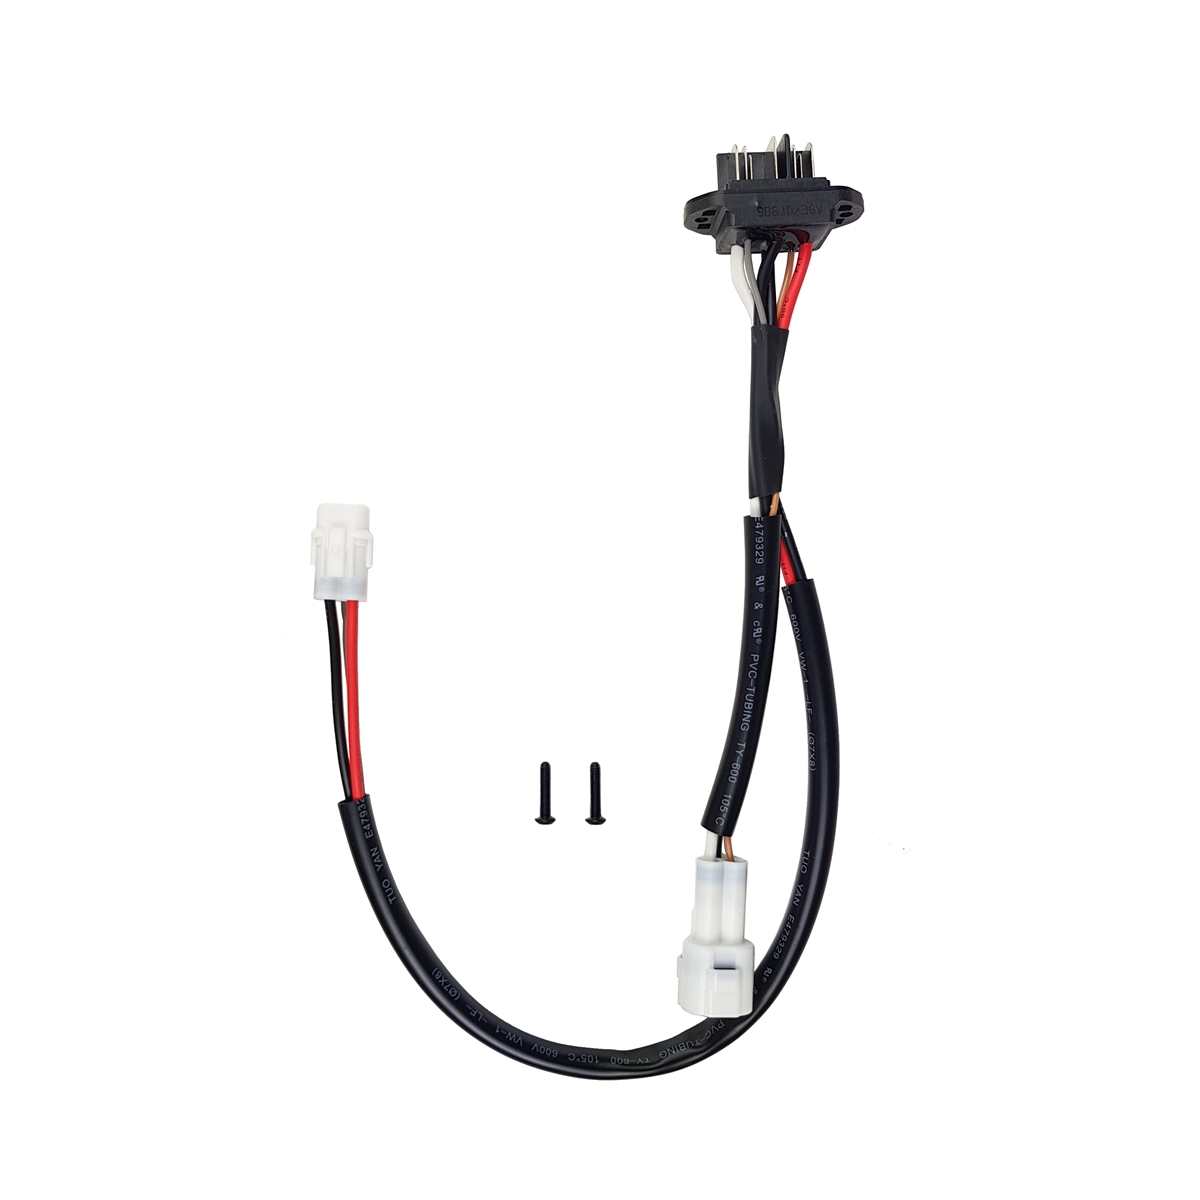 Snake 500wh motor - battery connection cable